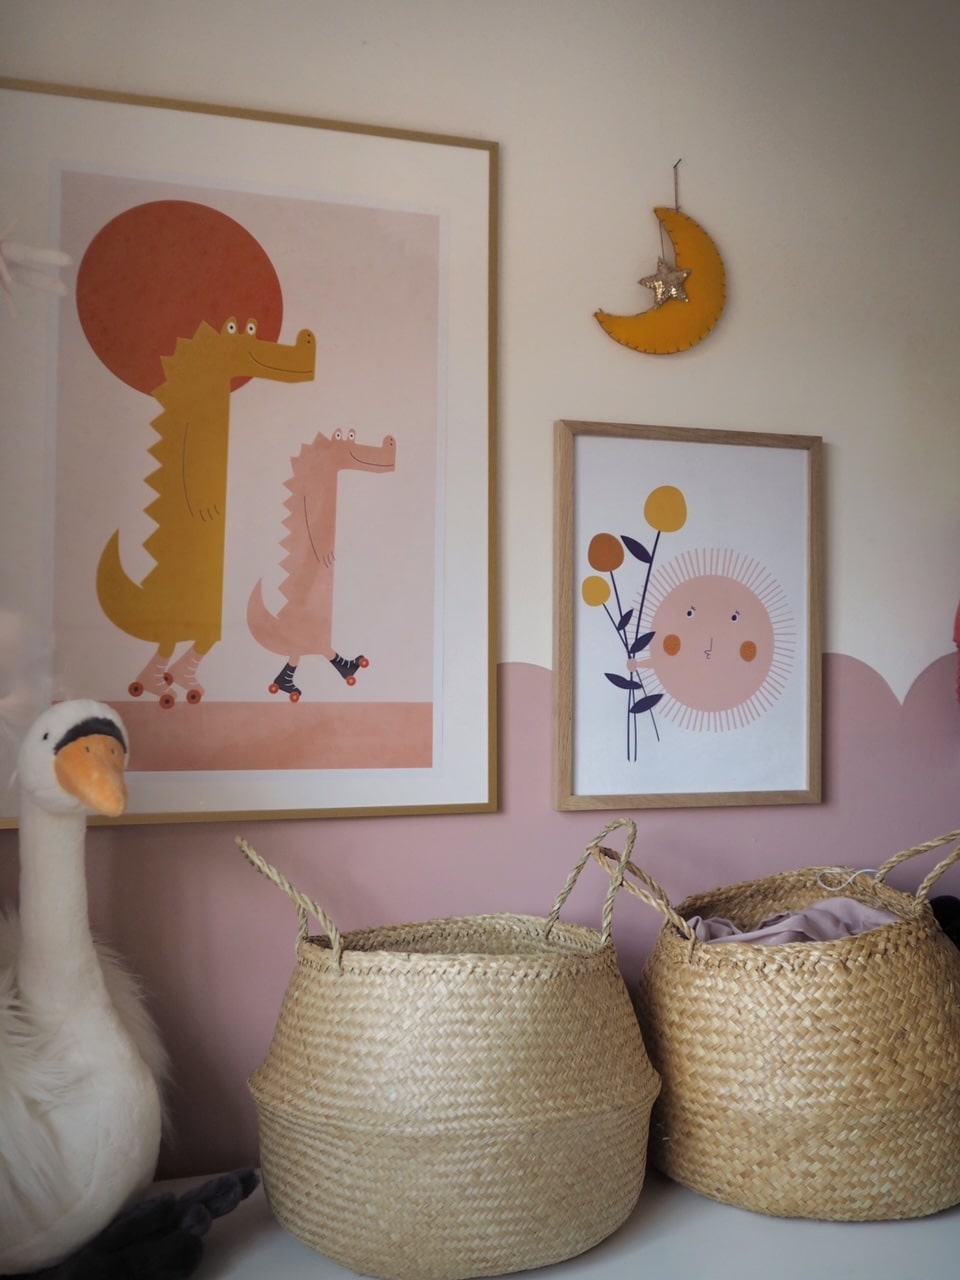 How to make a DIY moon and star decoration for a child's nursery using glitter felt. Easy craft project through which you can learn the blanket stitch